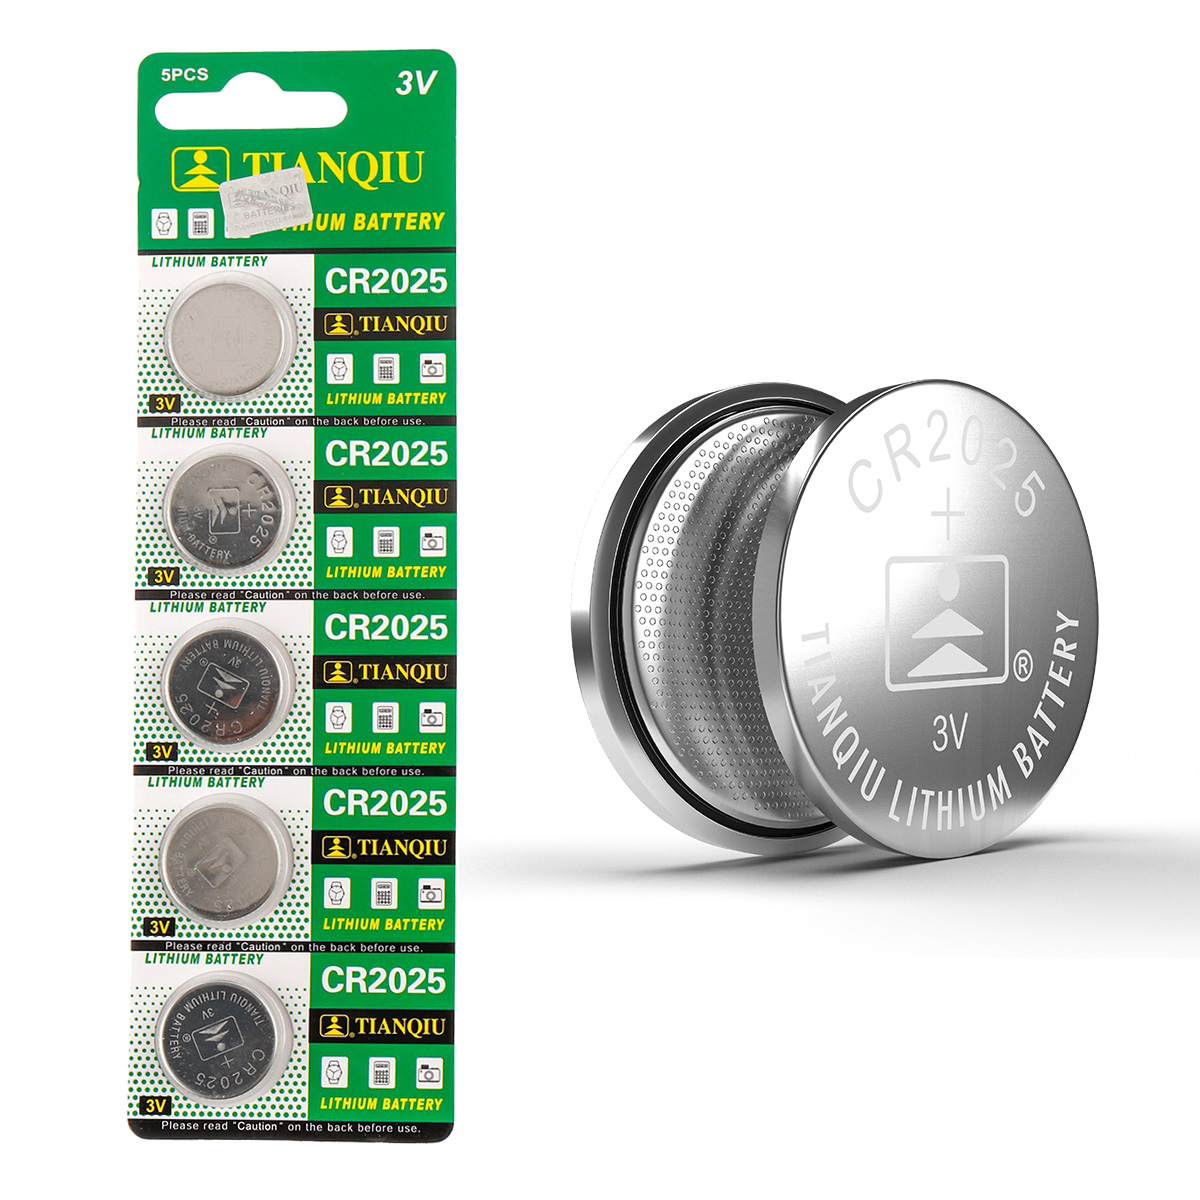 CR2025 Lithium Coin Cell Battery